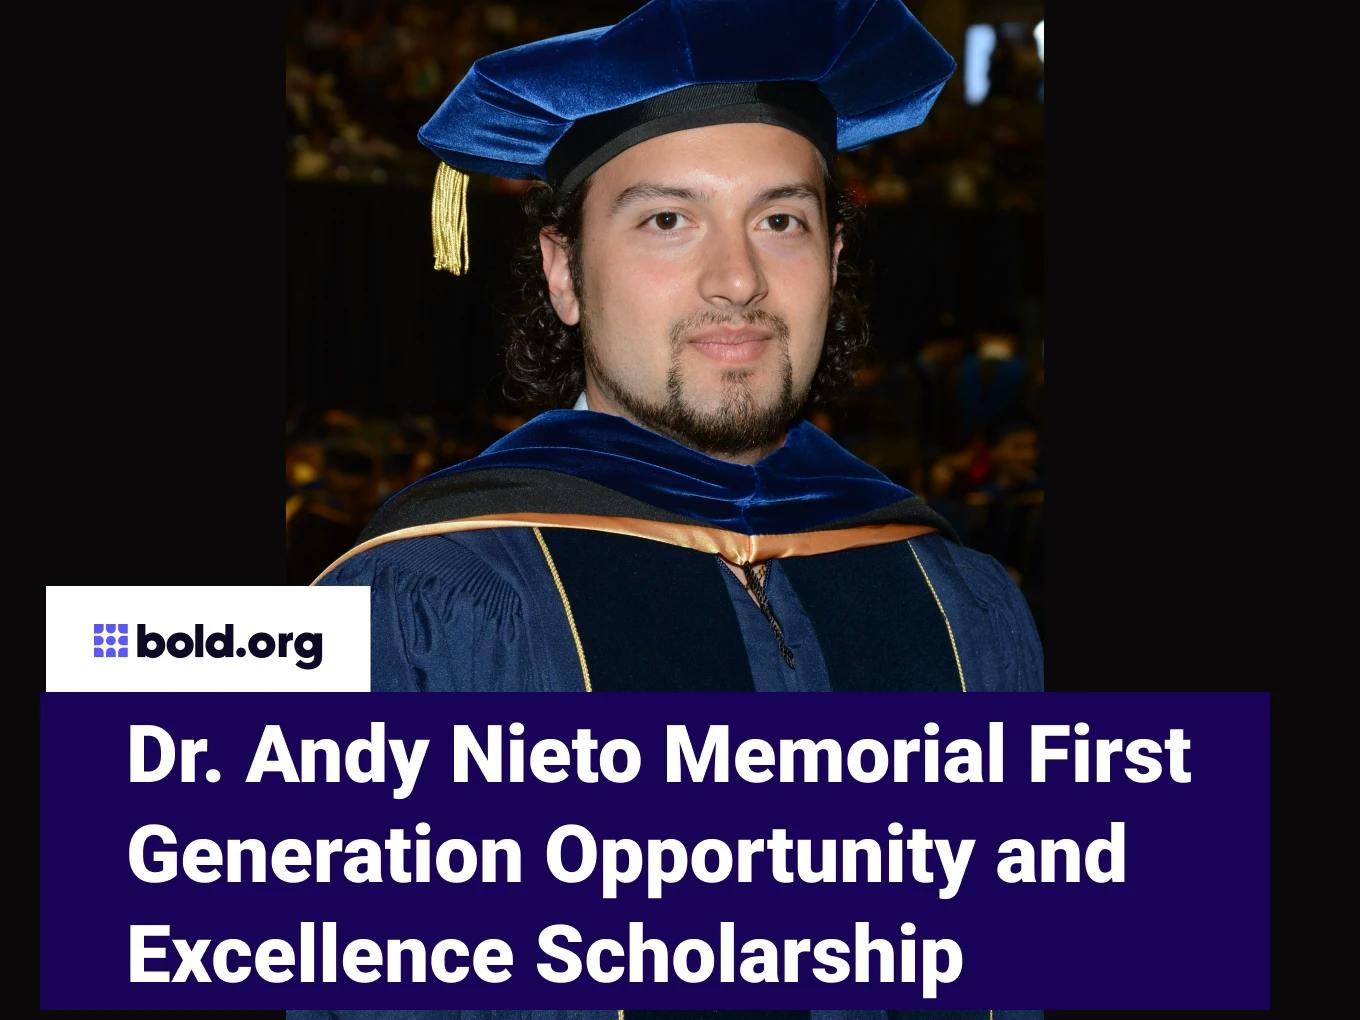 Dr. Andy Nieto Memorial First Generation Opportunity and Excellence Scholarship